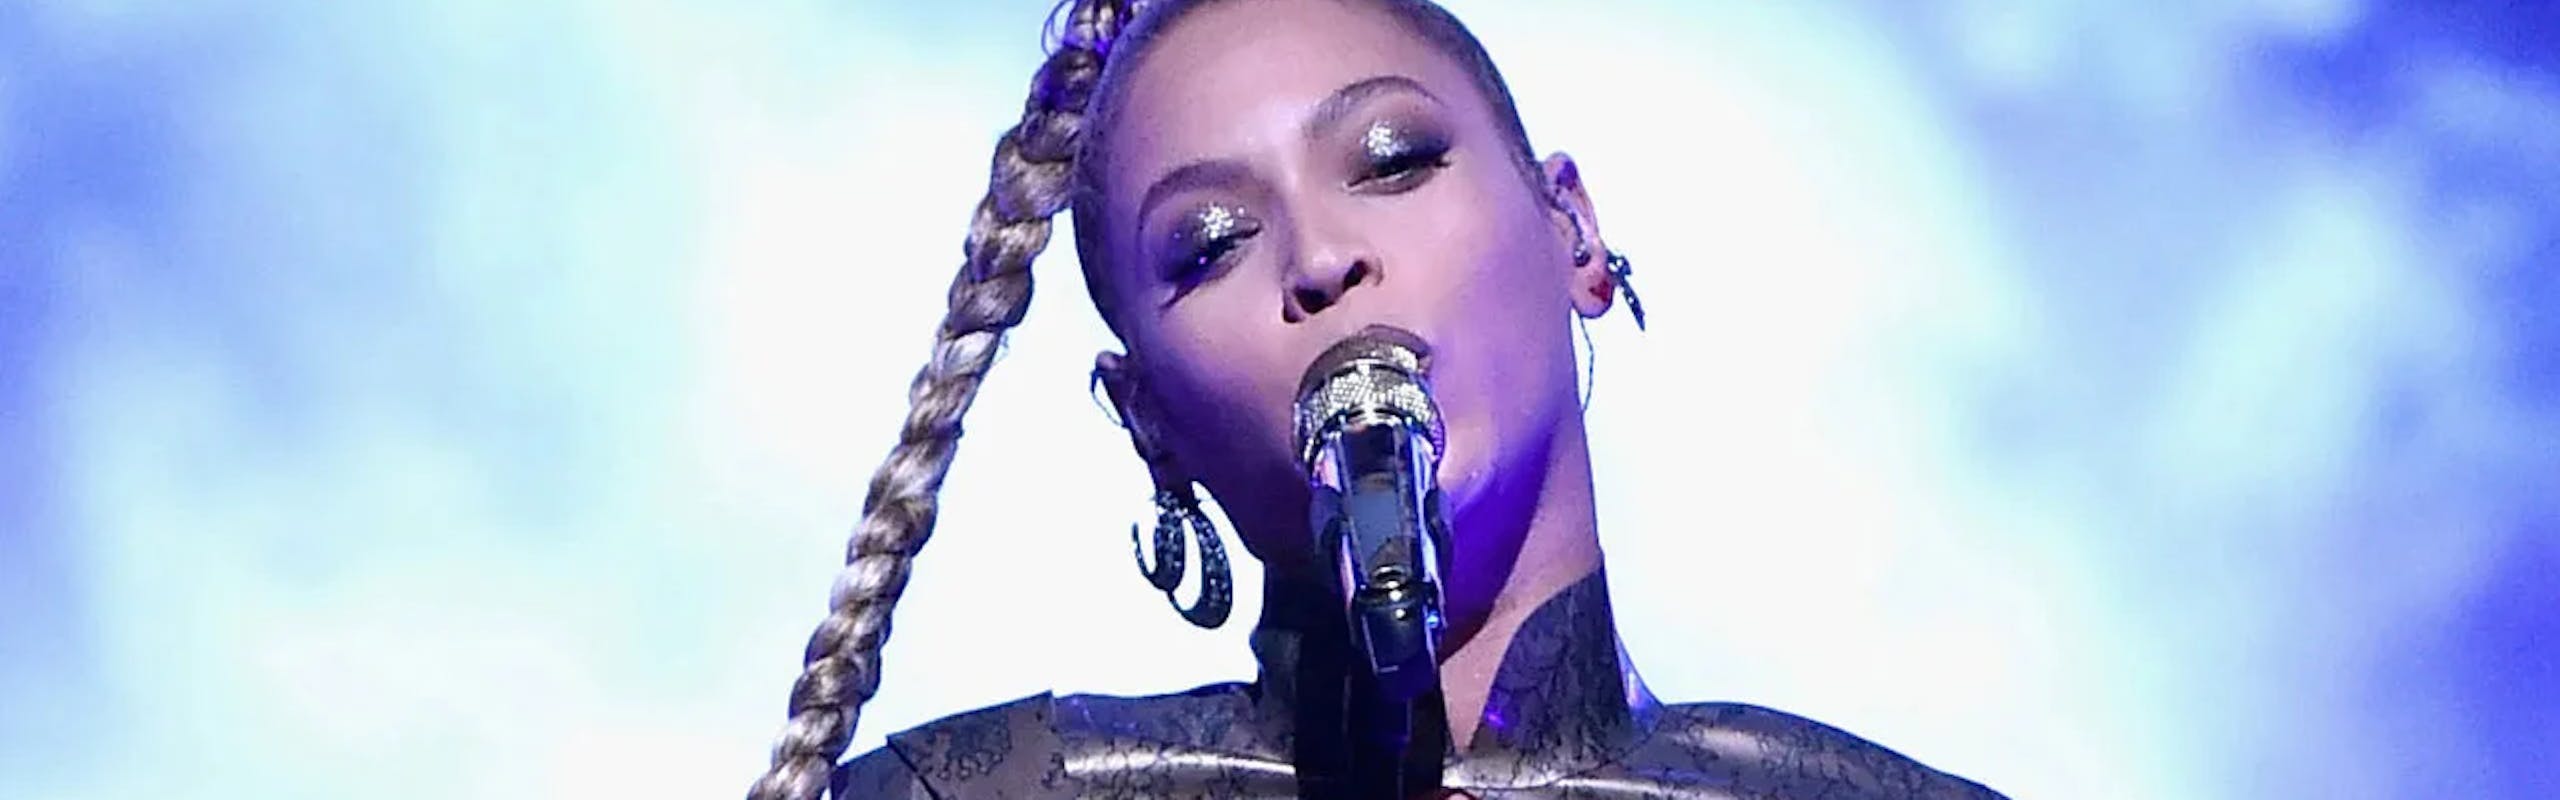 Beyonce on stage with long braid, silver body suit, and knee-high boots.